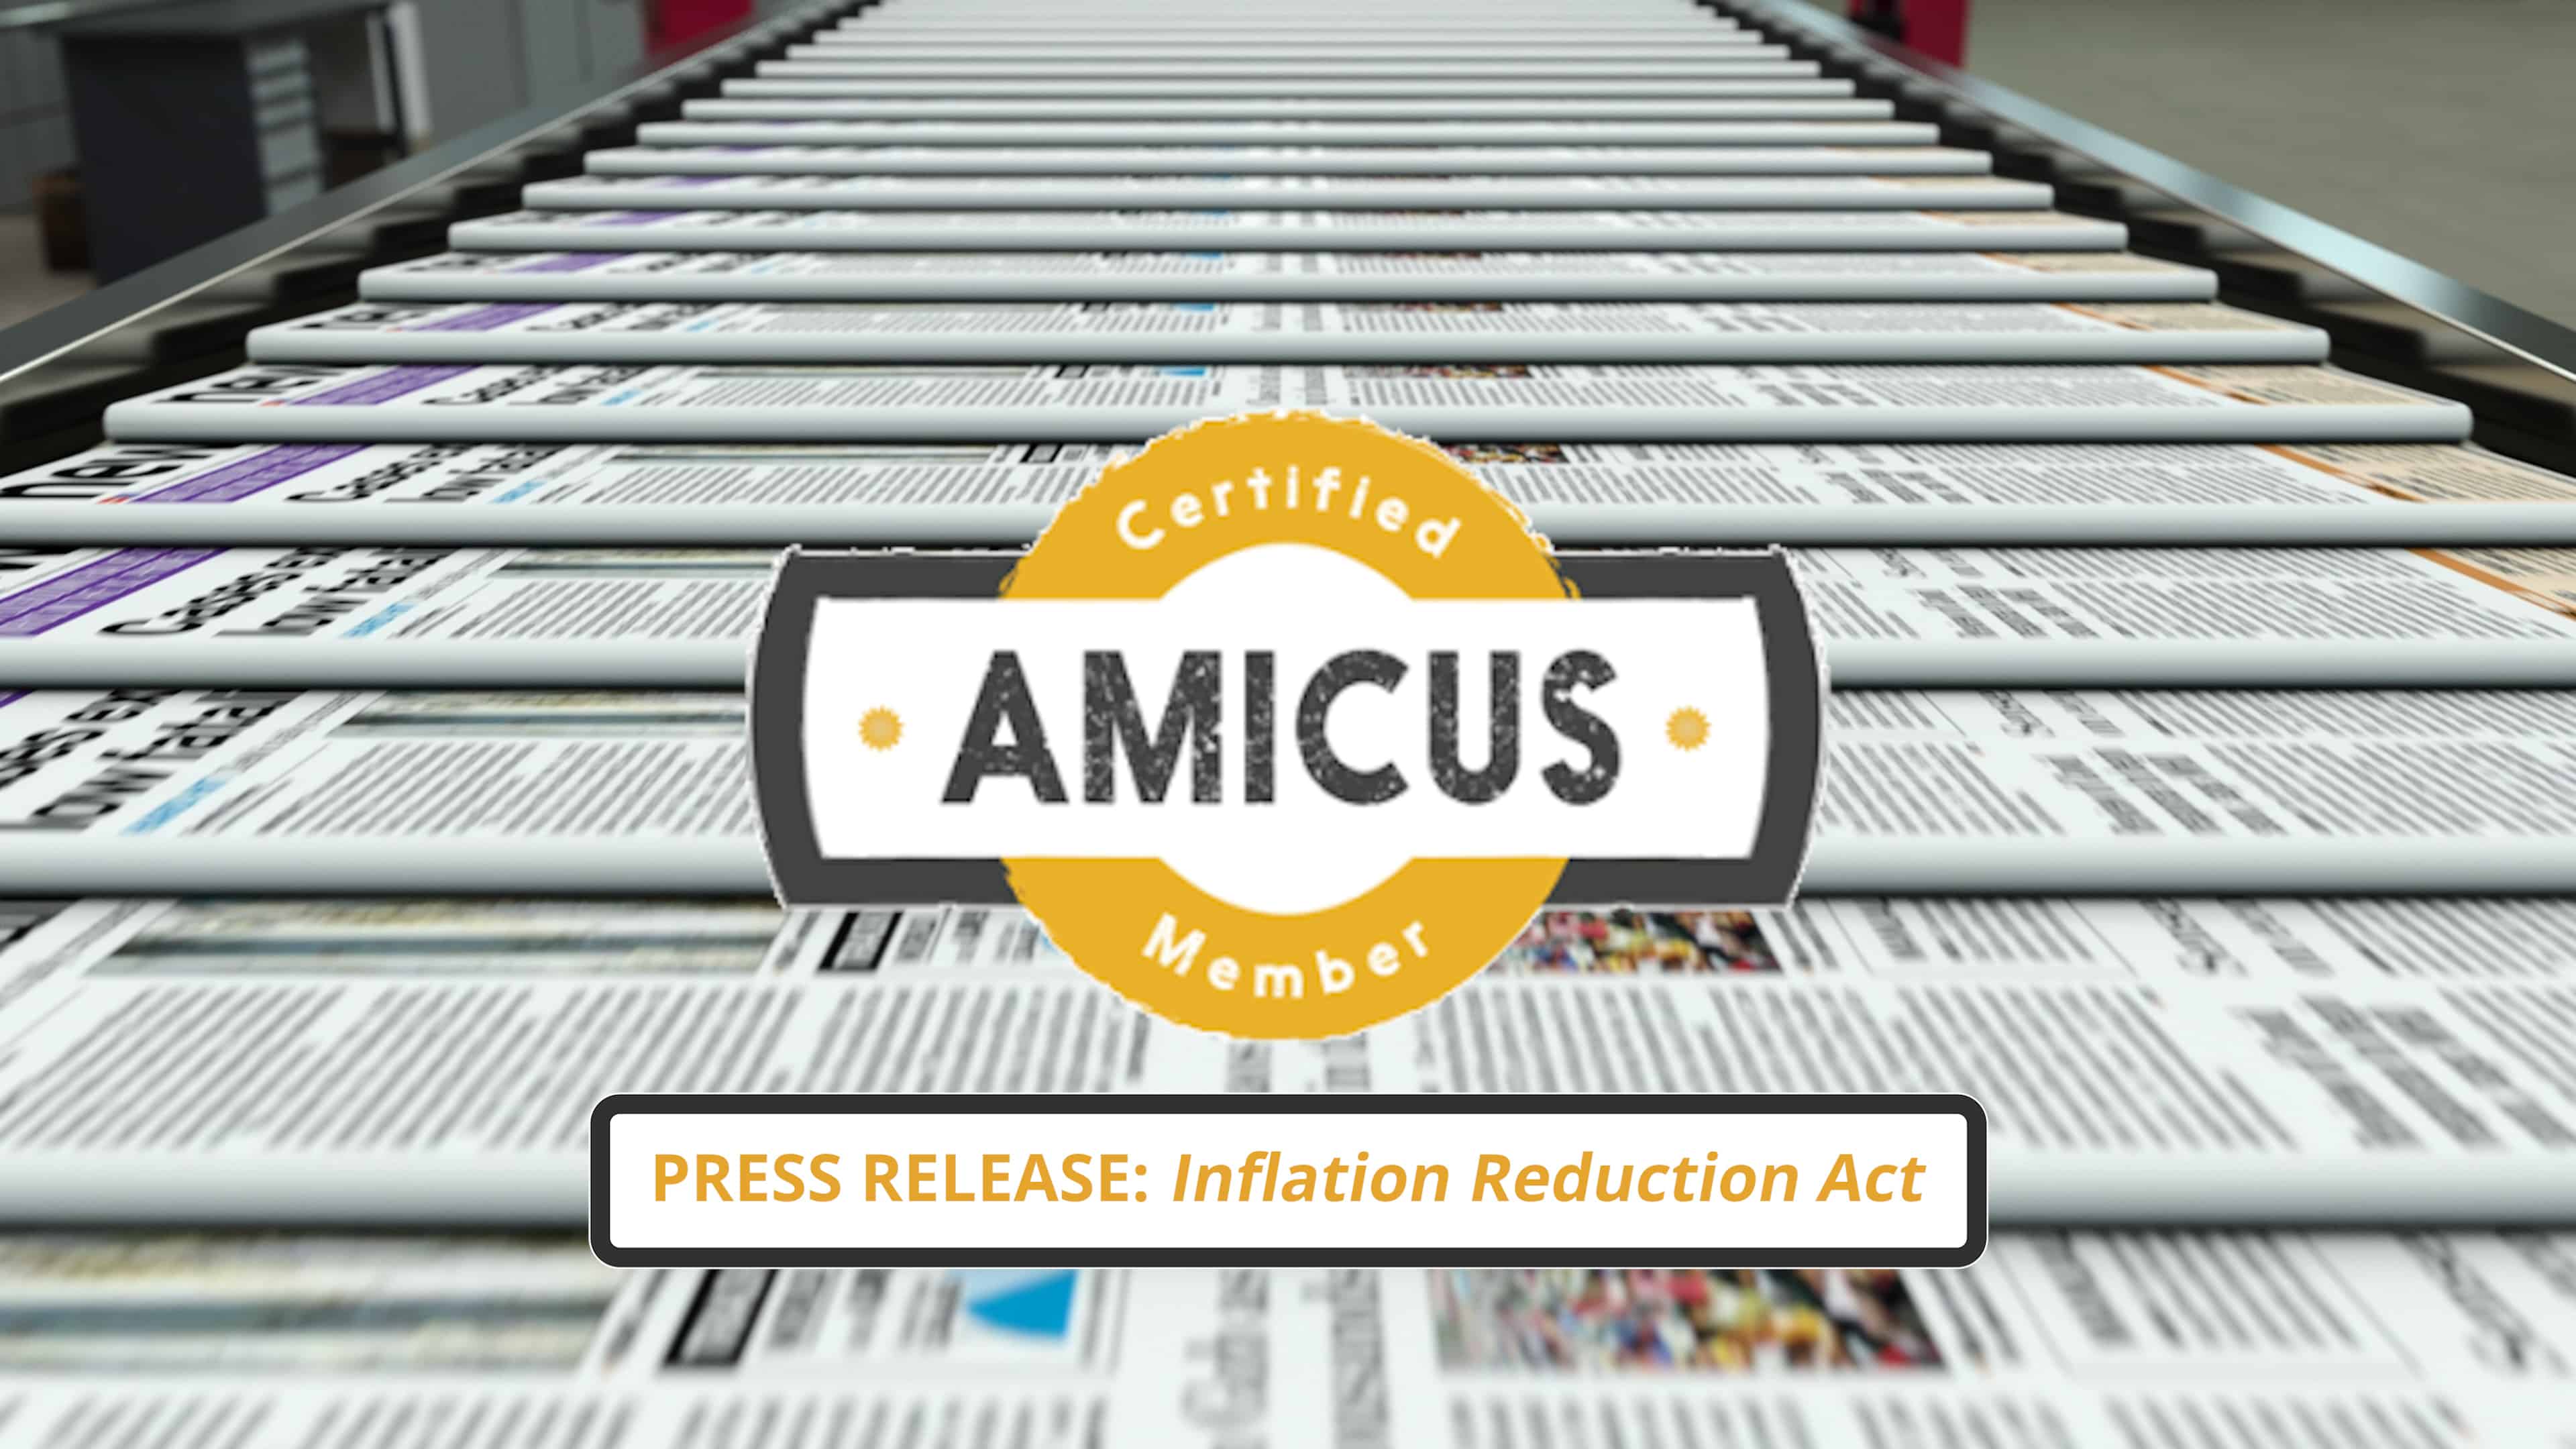 Inflation Reduction Act